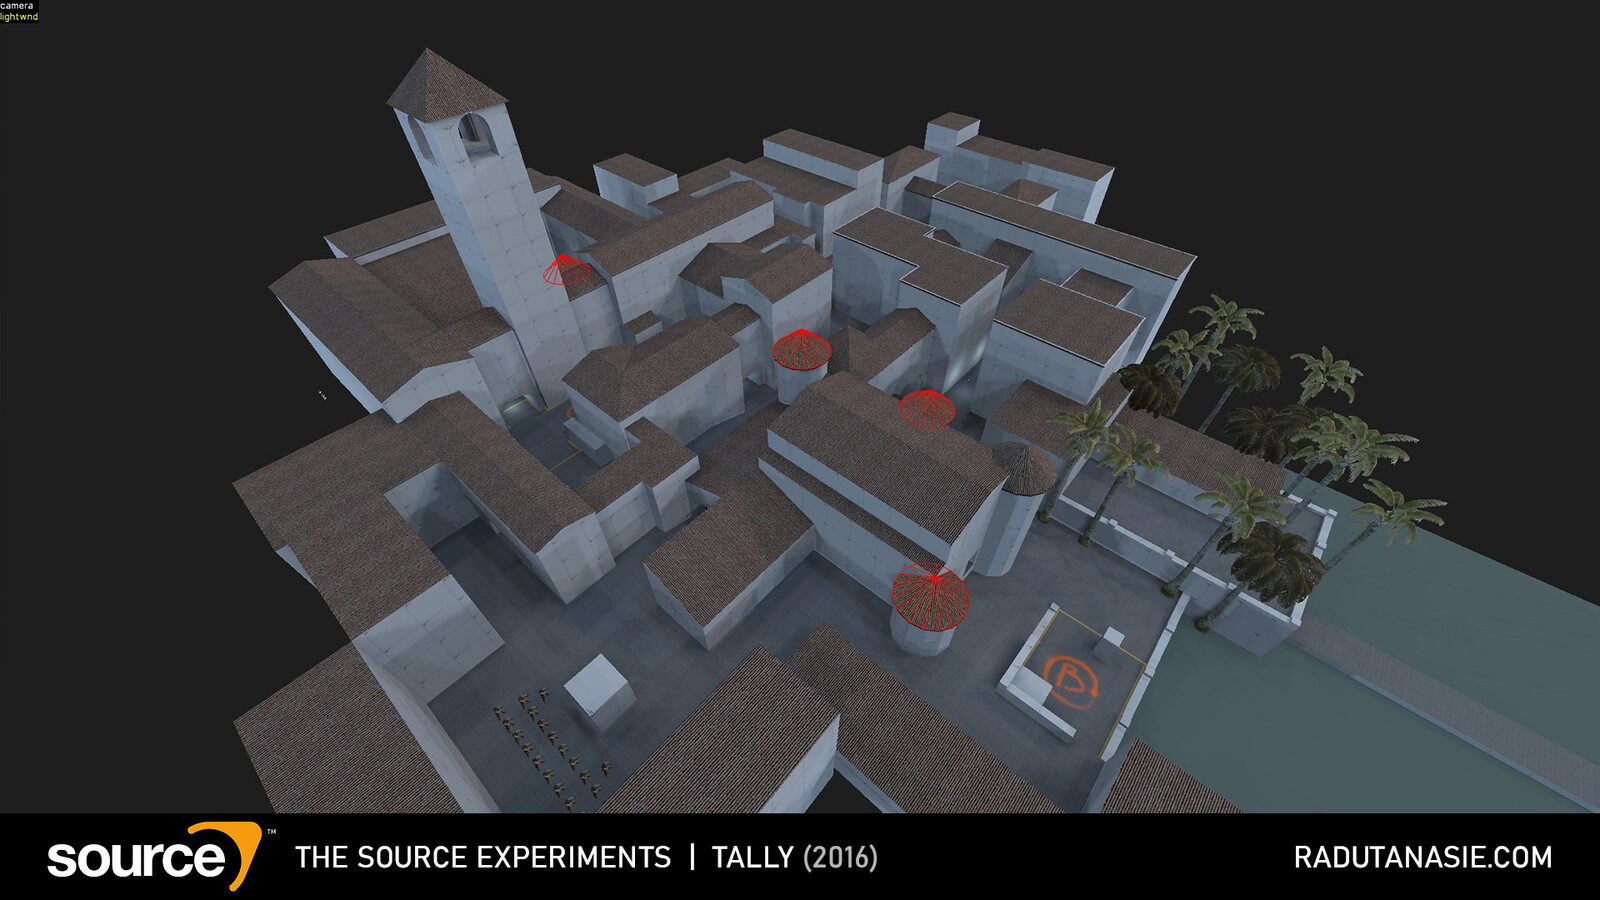 Tally was one of my first bomb/defuse maps for Counter-Strike: Global Offensive where I managed to create a functional layout and incorporate a theme properly.